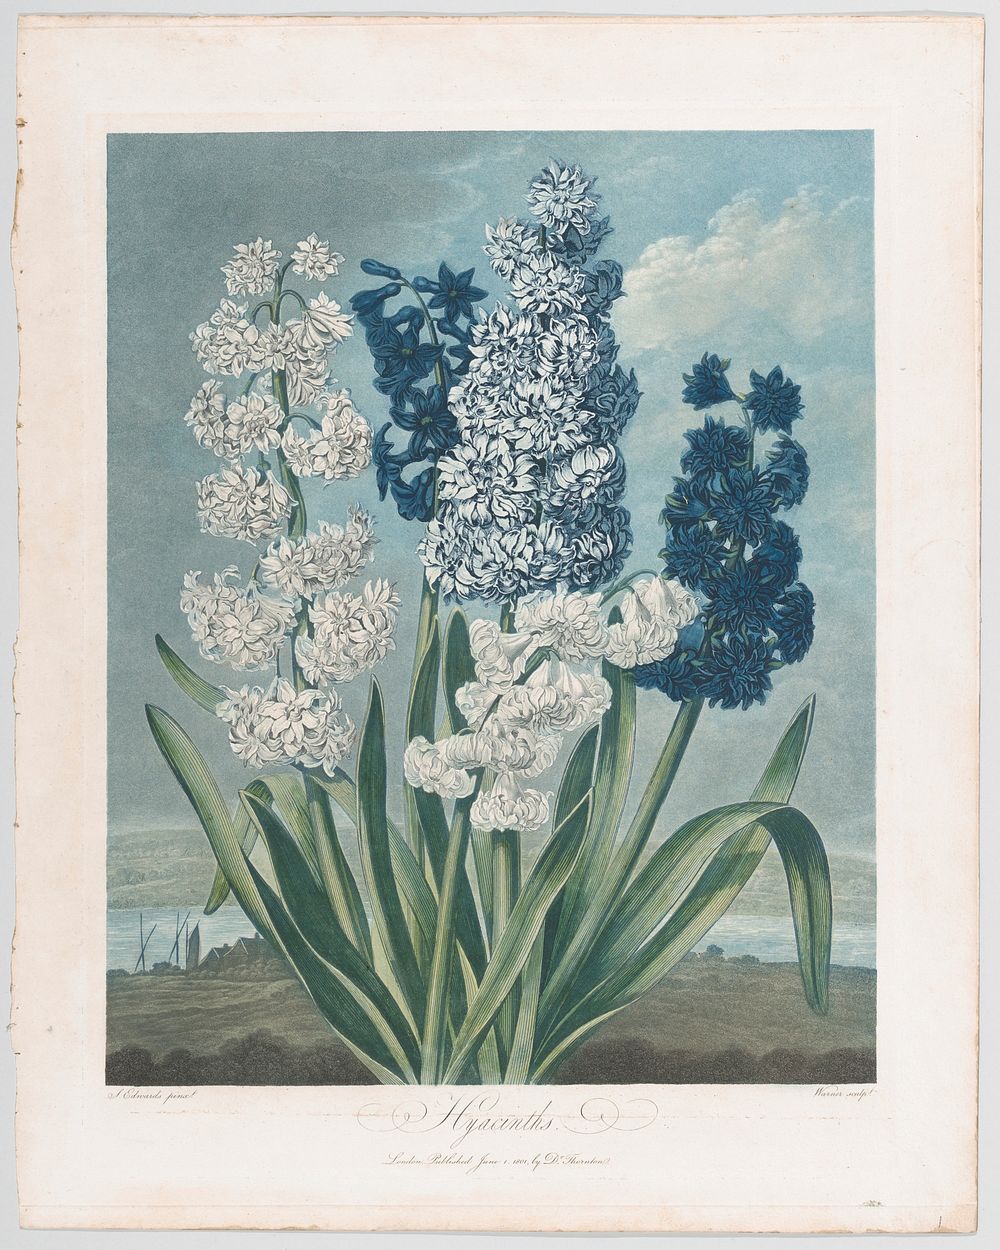 Hyacinths, from "The Temple of Flora, or Garden of Nature" by Robert John Thornton